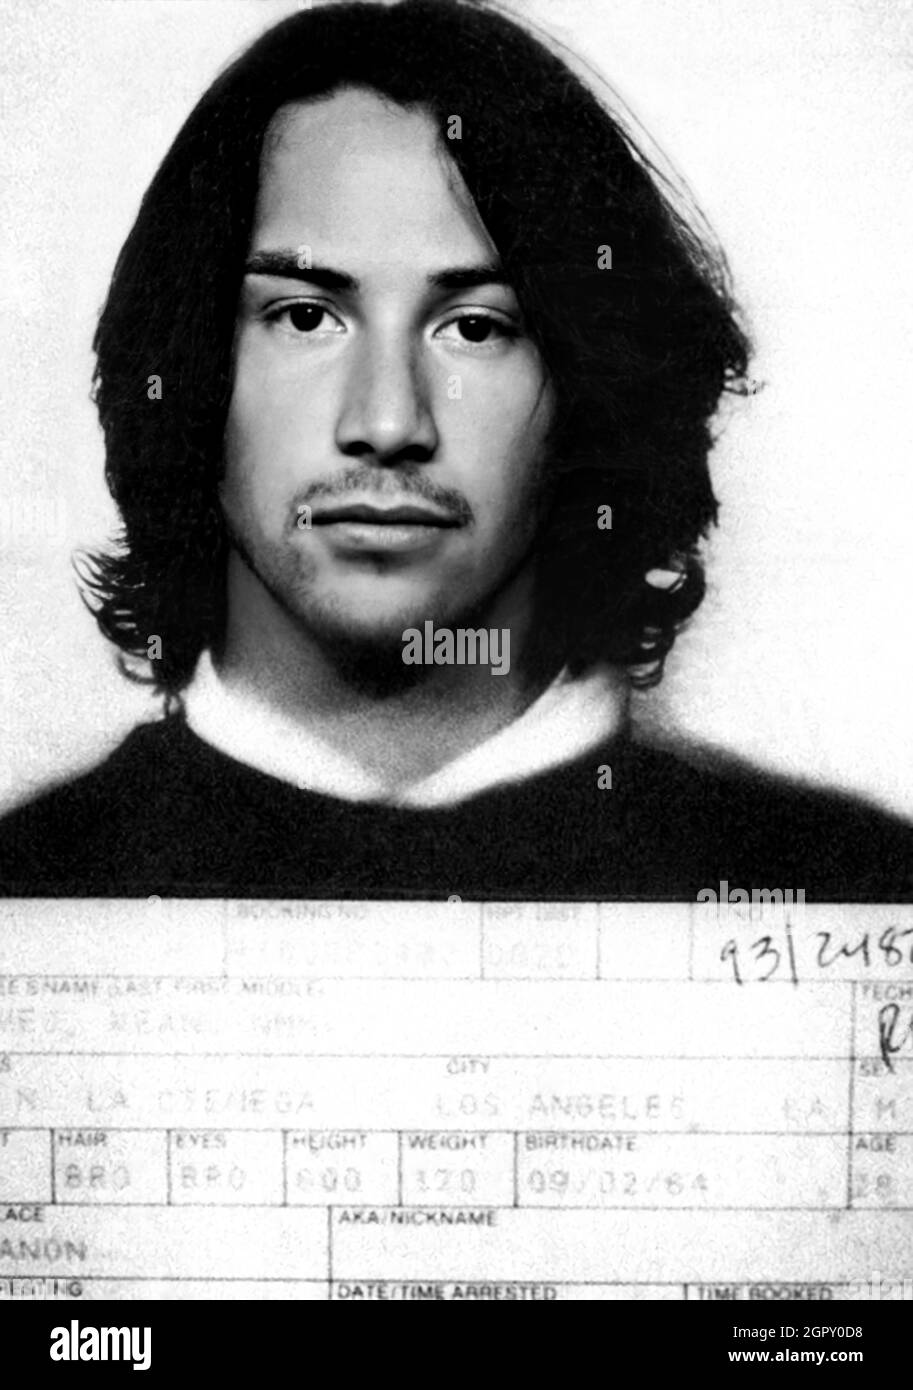 1993, LOS ANGELES , USA : The celebrated  movie actor KEANU REEVES ( born 12 september 1964 ) when was arrested by Los Angeles Police for driving under the influence of alcohol . Unknown photographer , Police Department of Los Angeles . - HISTORY - FOTO STORICHE - ATTORE - MOVIE - CINEMA - TEATRO - THEATRE - ARRESTO - Arrestation - ARRESTATO DALLA POLIZIA - FOTO SEGNALETICA - mugshot - mug shot - RITRATTO - PORTRAIT --- ARCHIVIO GBB Stock Photo